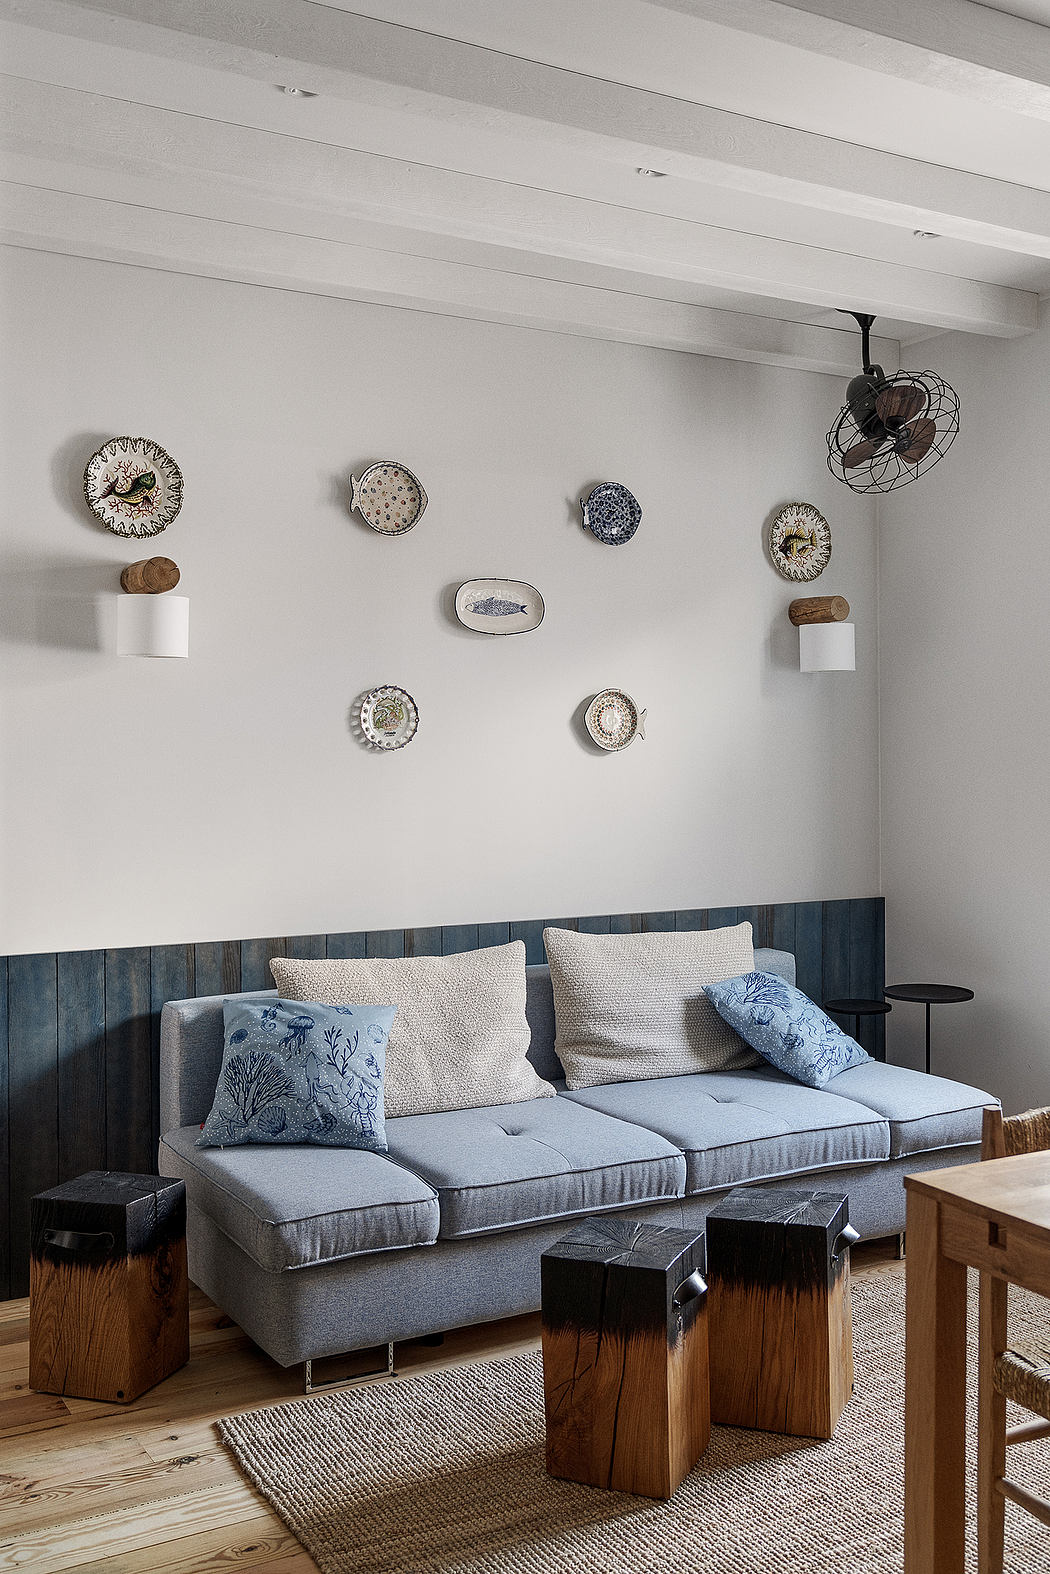 Cozy living space with decorative plates on wall and grey sofa.